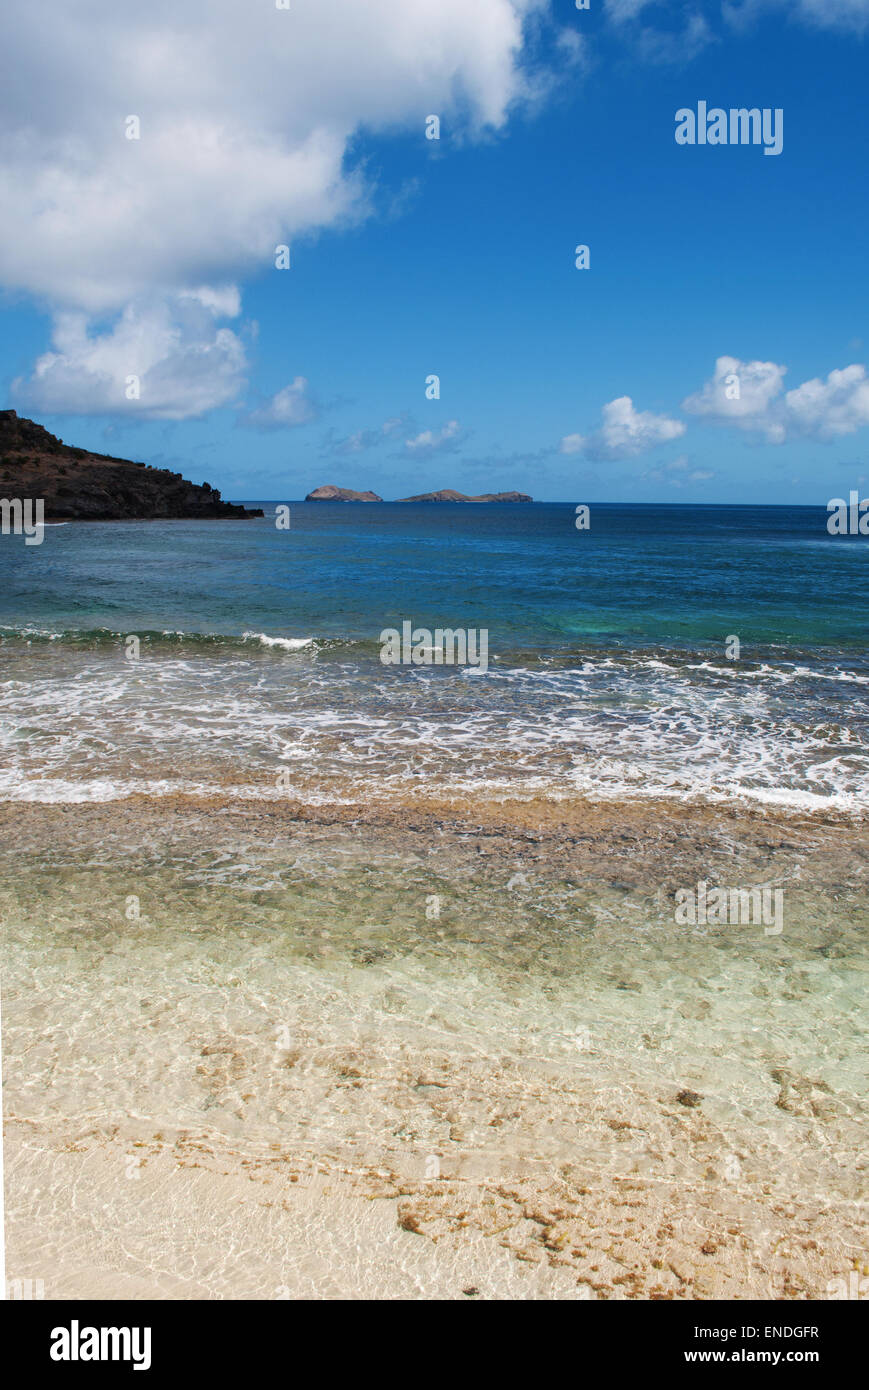 St Barth, St. Barths, Saint-Barthélemy, French West Indies, French Antilles, Caribbean Stock Photo